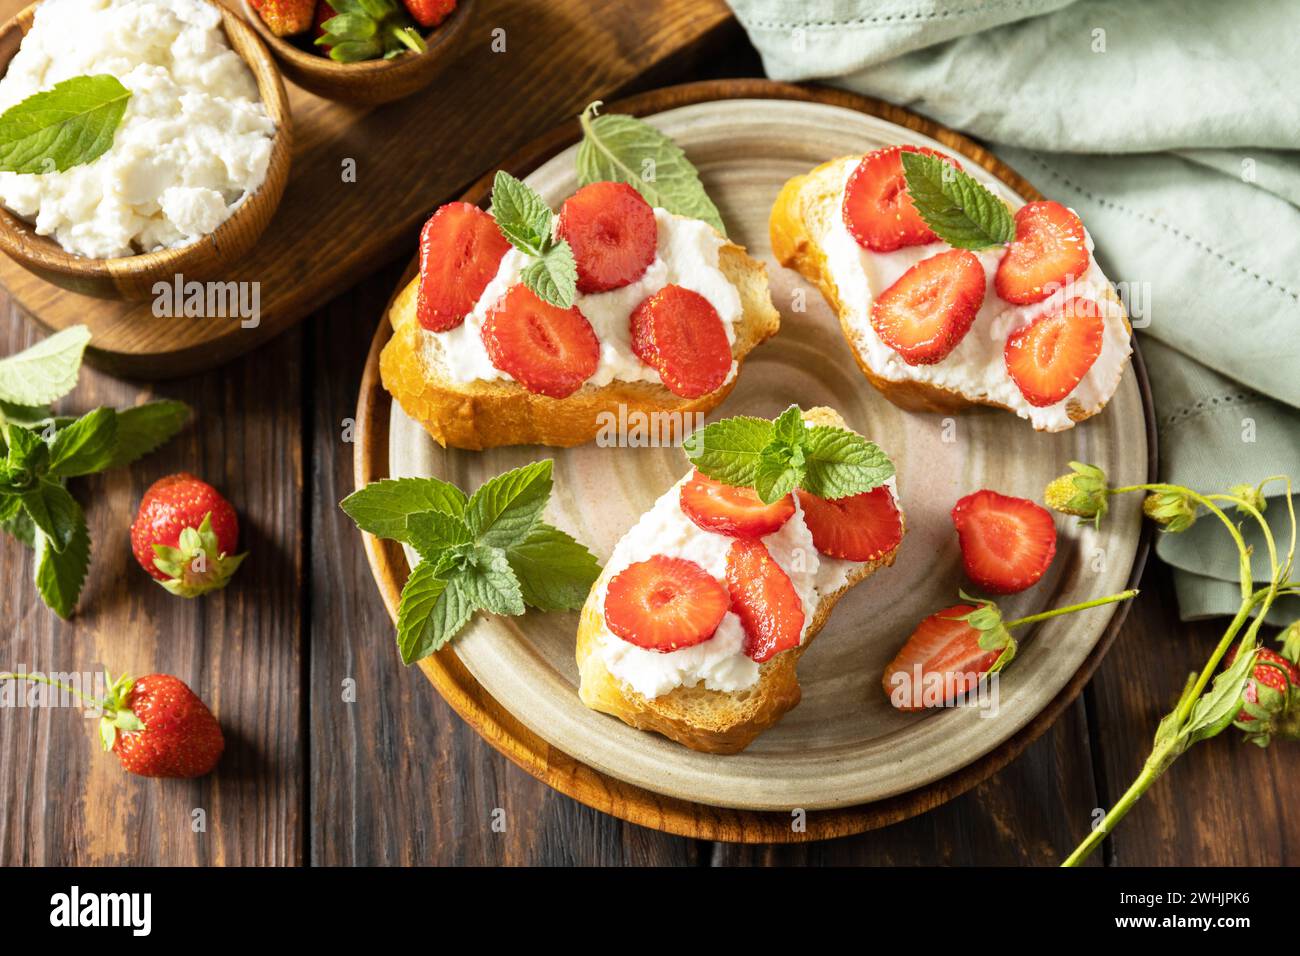 Berries toast breakfast, healthy food. Sandwich with strawberries and soft cheese on wooden background. Stock Photo